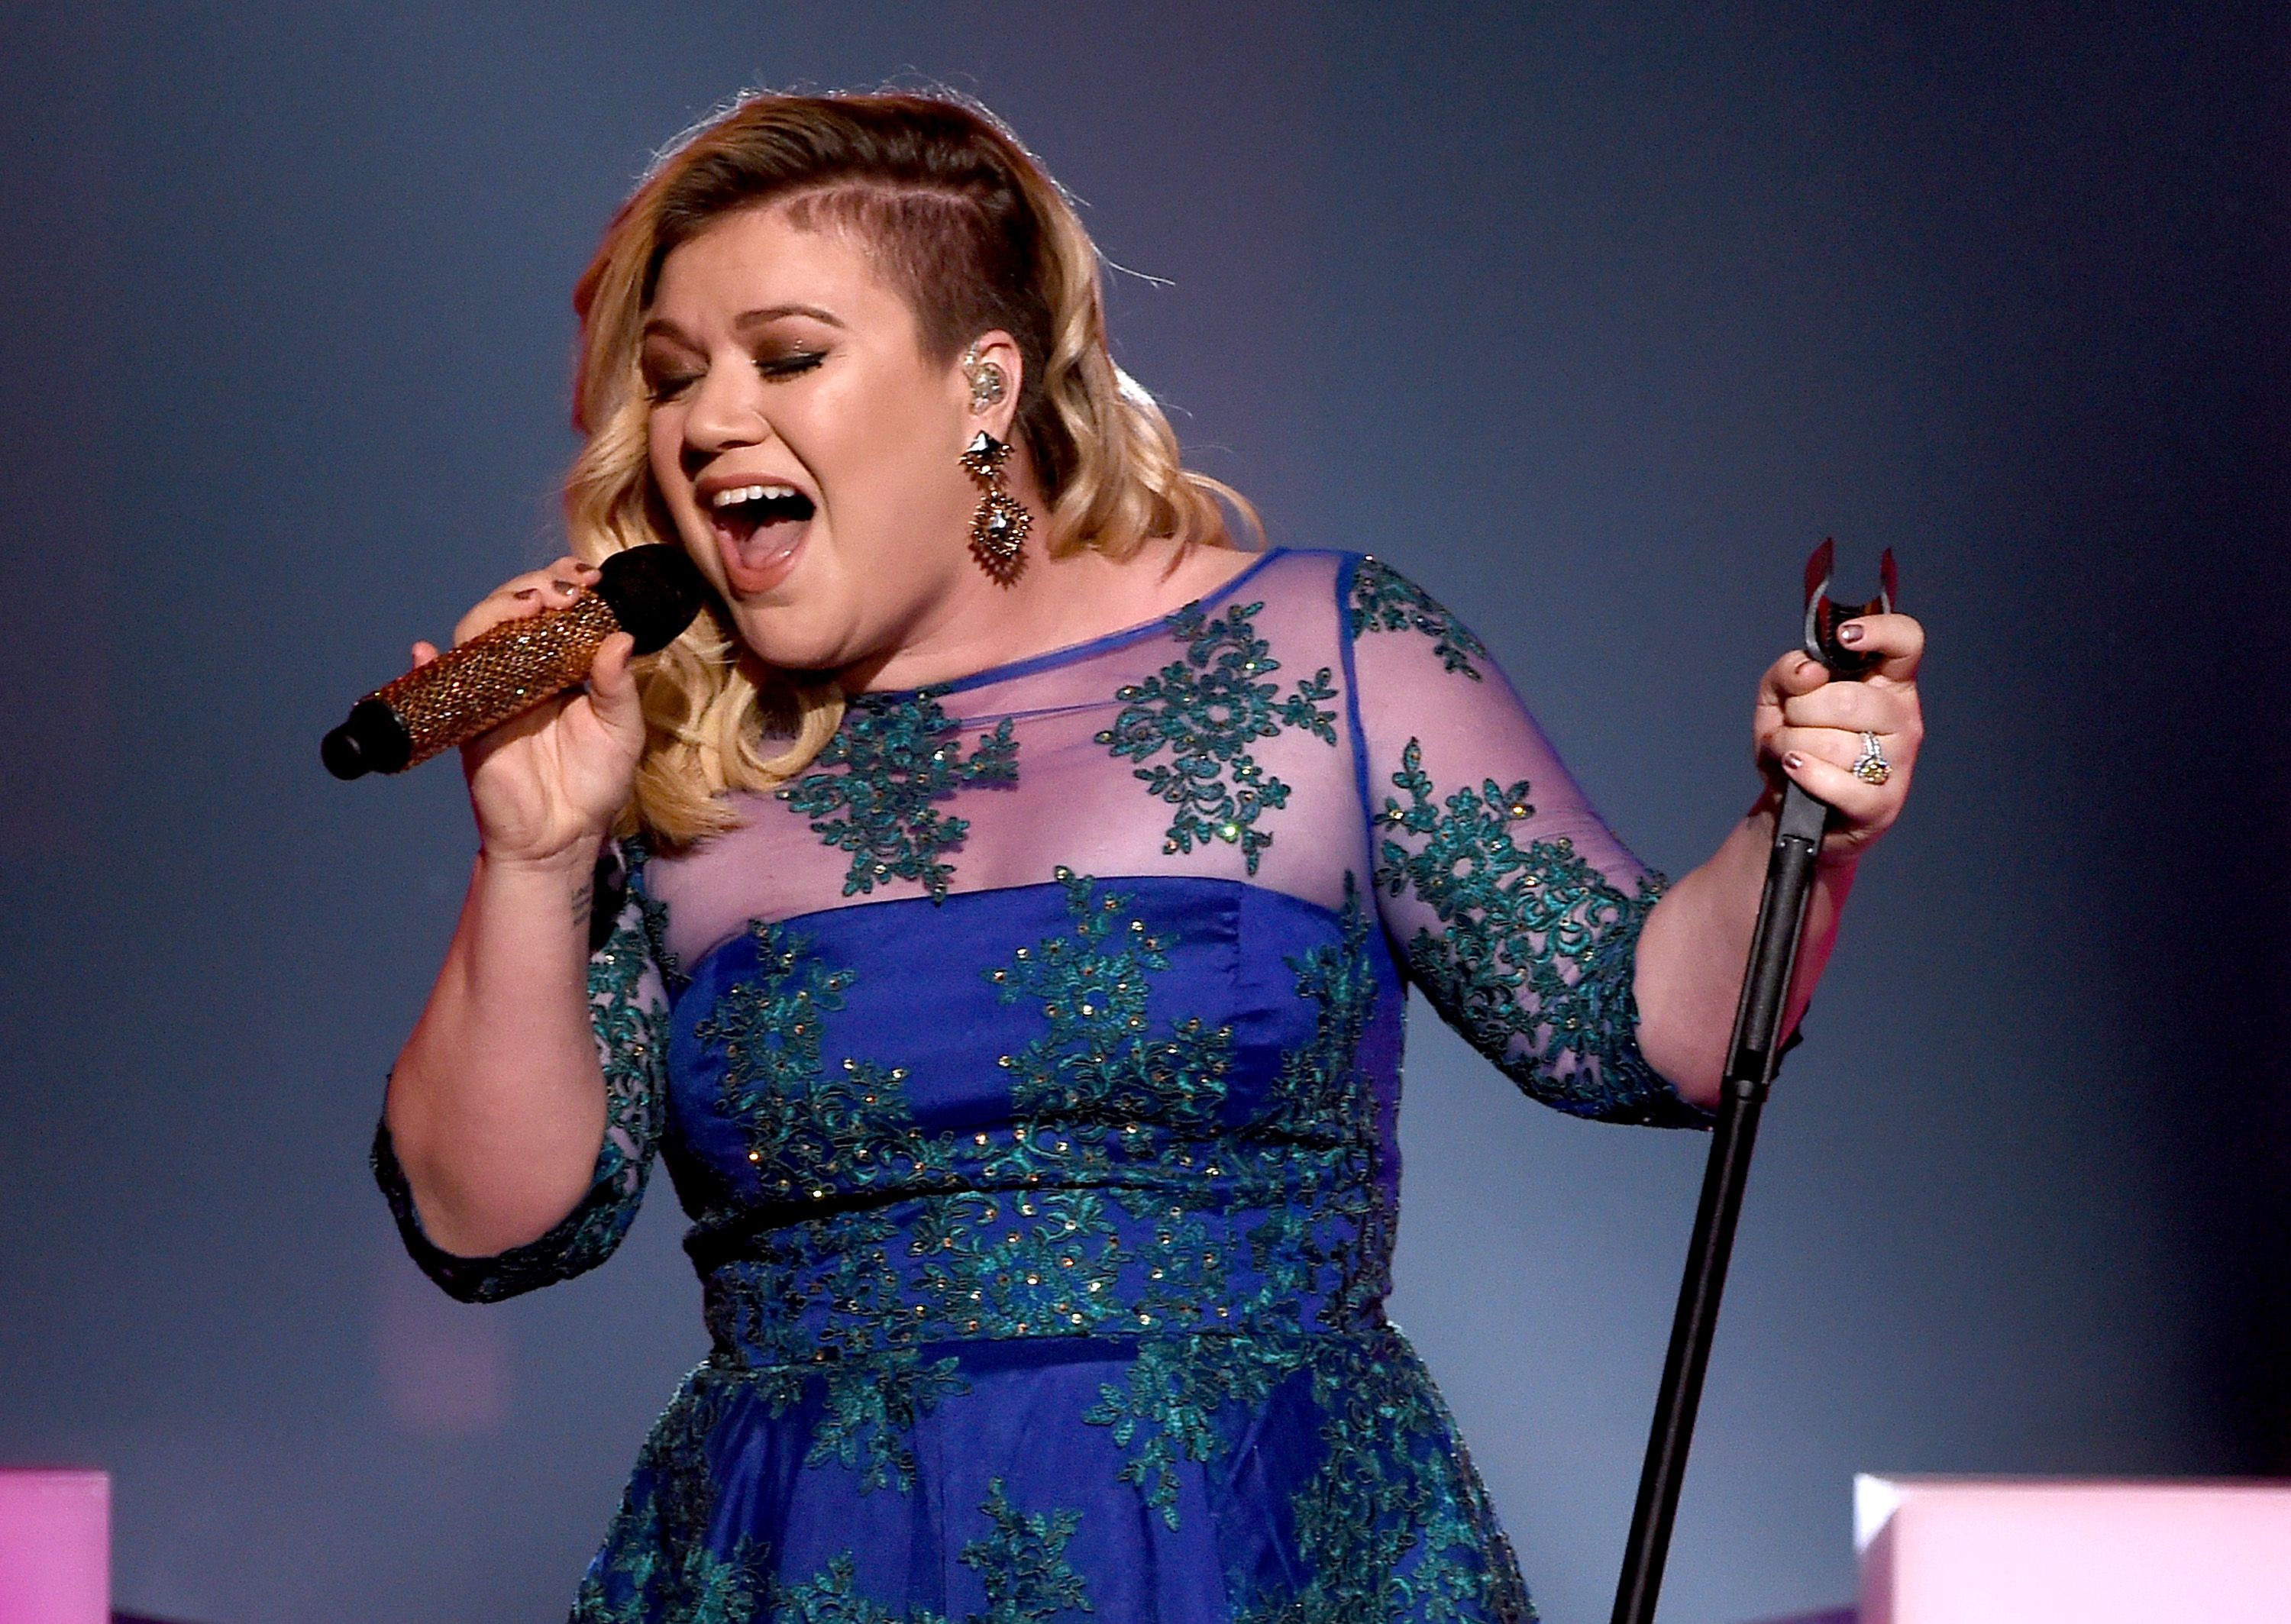 Kelly Clarkson performed 'Heartbeat Song' onstage during the 2015 iHeartRadio Music Awards which broadcasted live on NBC from The Shrine Auditorium on March 29, 2015 in Los Angeles, California. | Photo: Getty Images